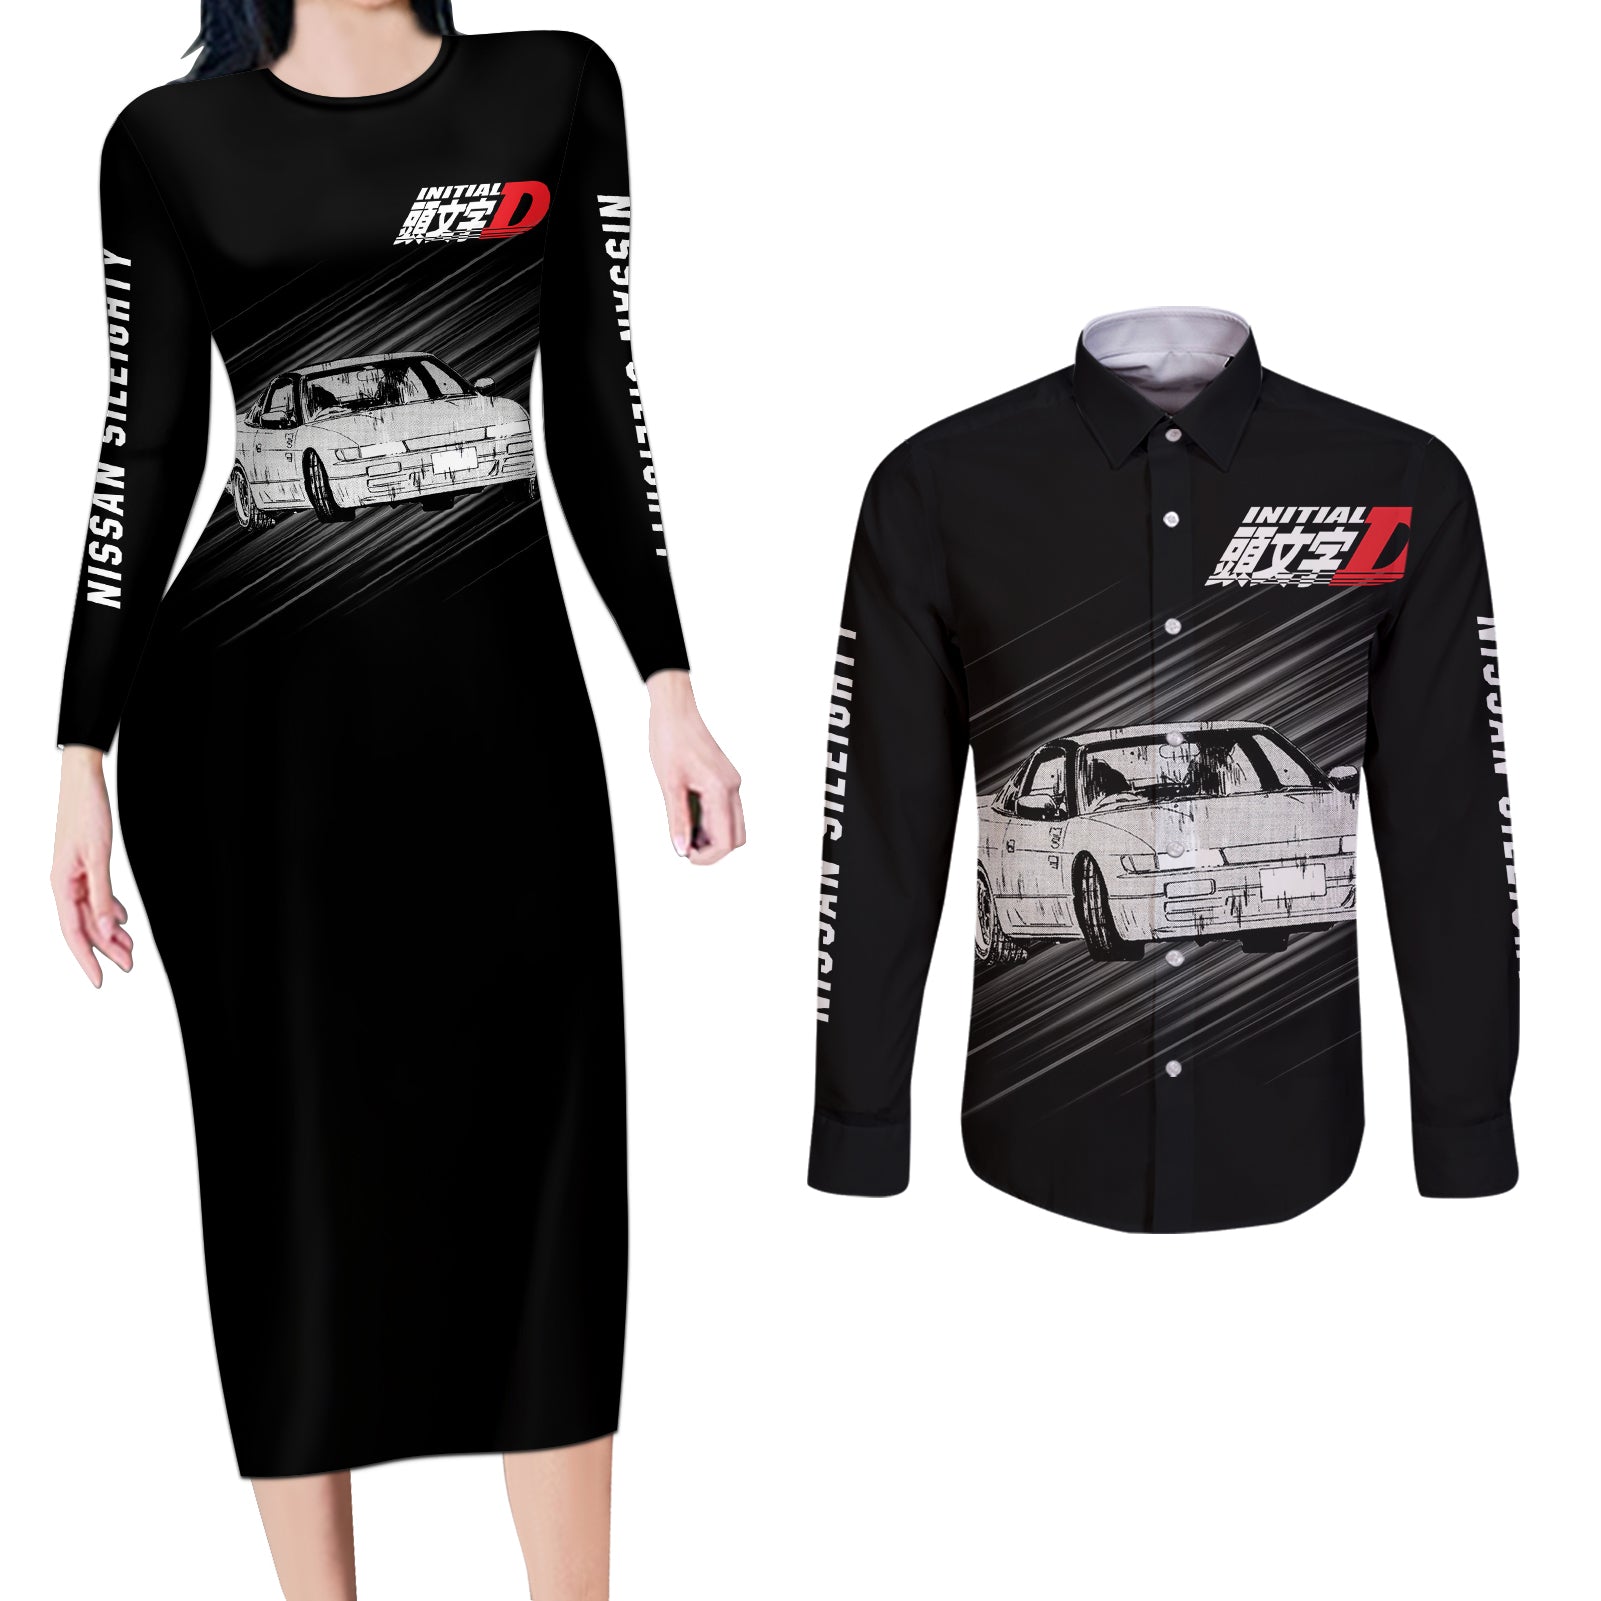 Mako Sato SilEighty Initial D Couples Matching Long Sleeve Bodycon Dress and Long Sleeve Button Shirt Manga Mix Anime Style